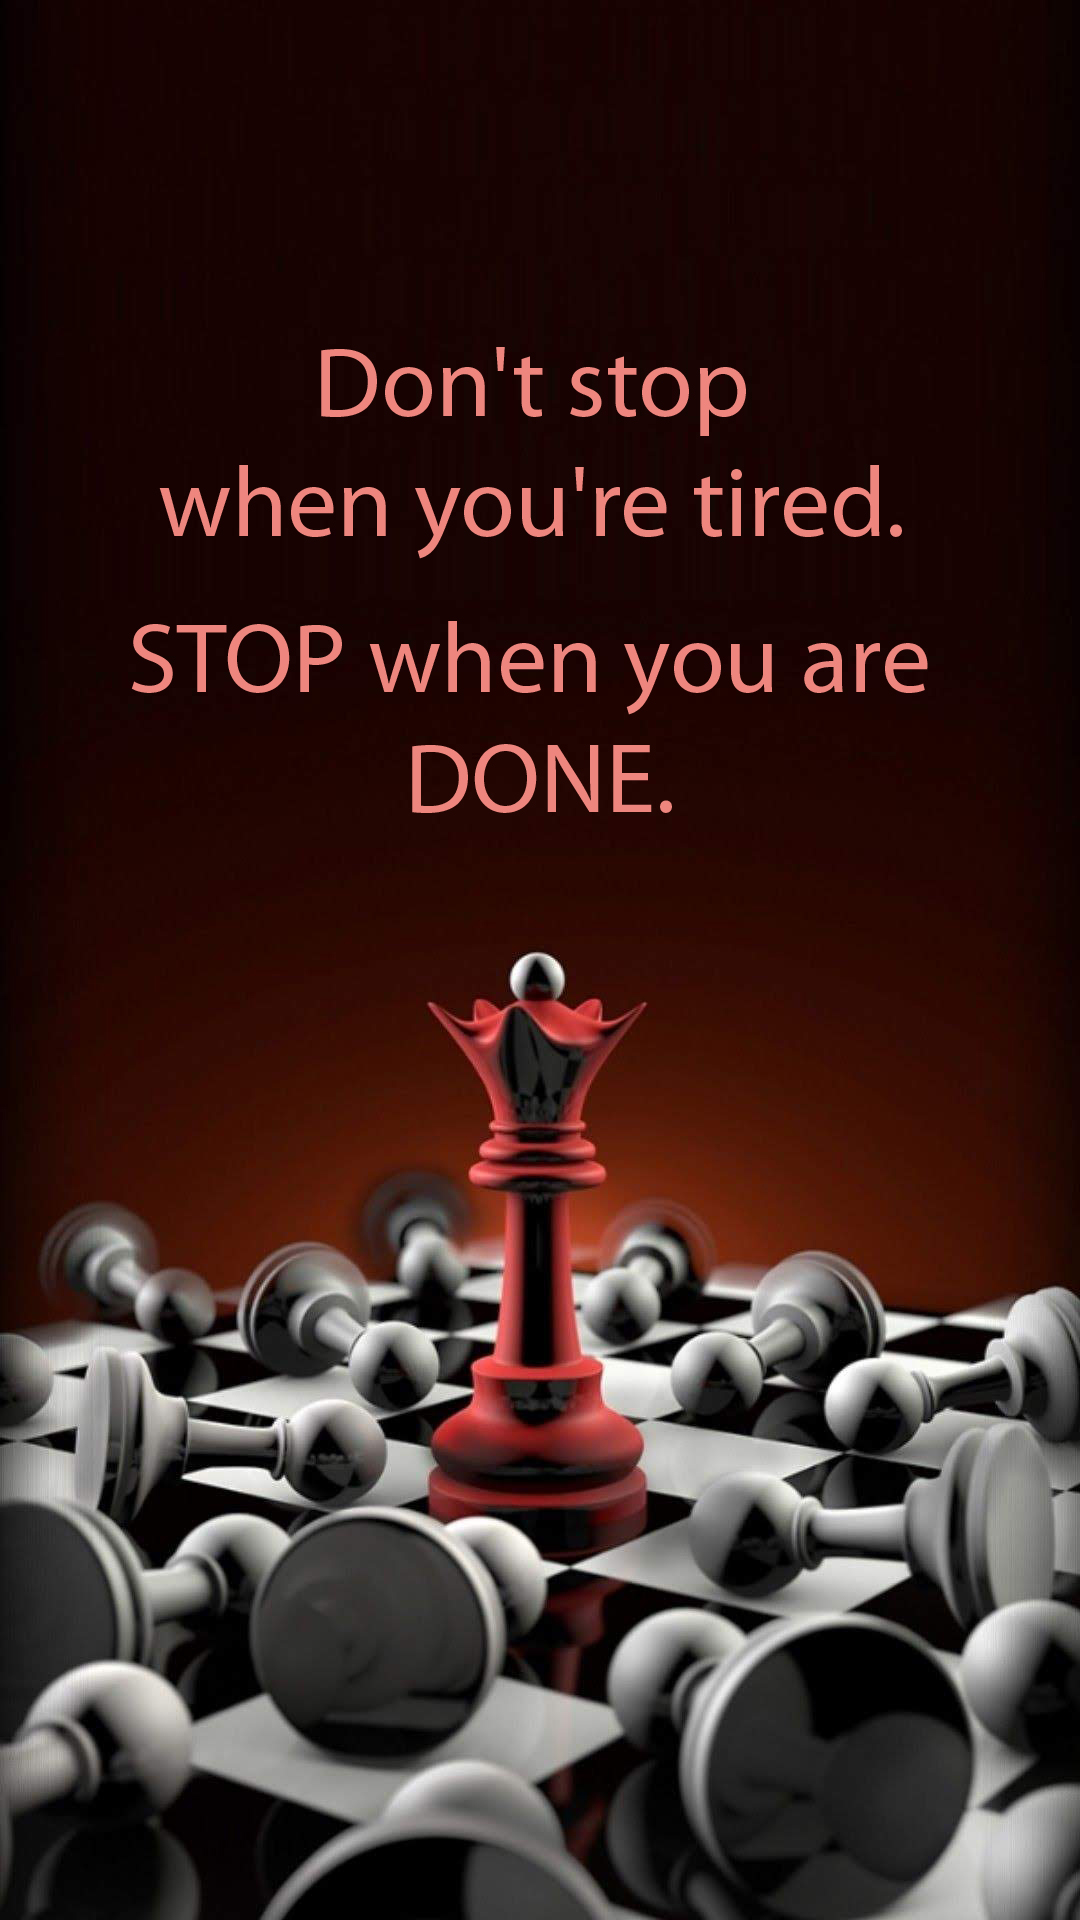 inspirational wallpapers for mobile,chess,games,indoor games and sports,board game,recreation